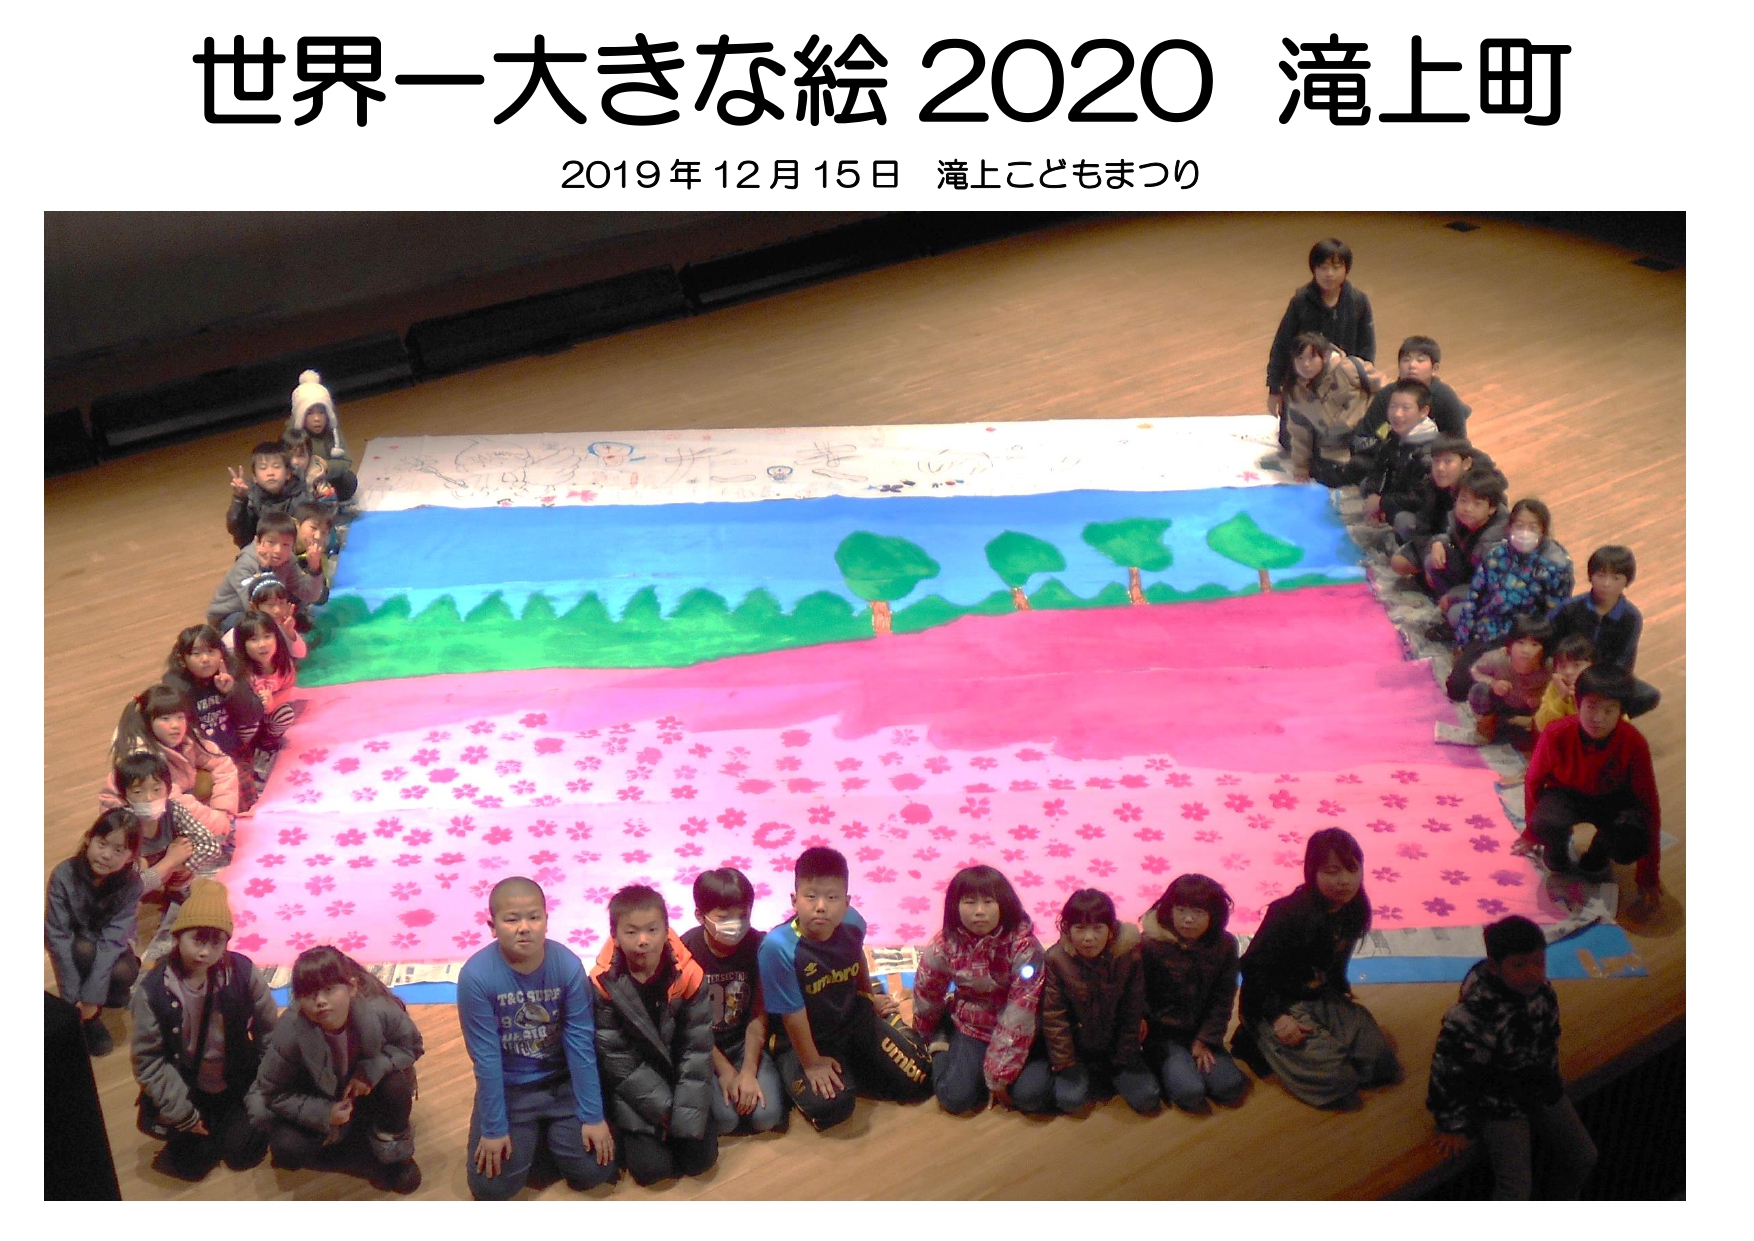 The Biggest Painting in the World 2020 Takinoue Town was completed